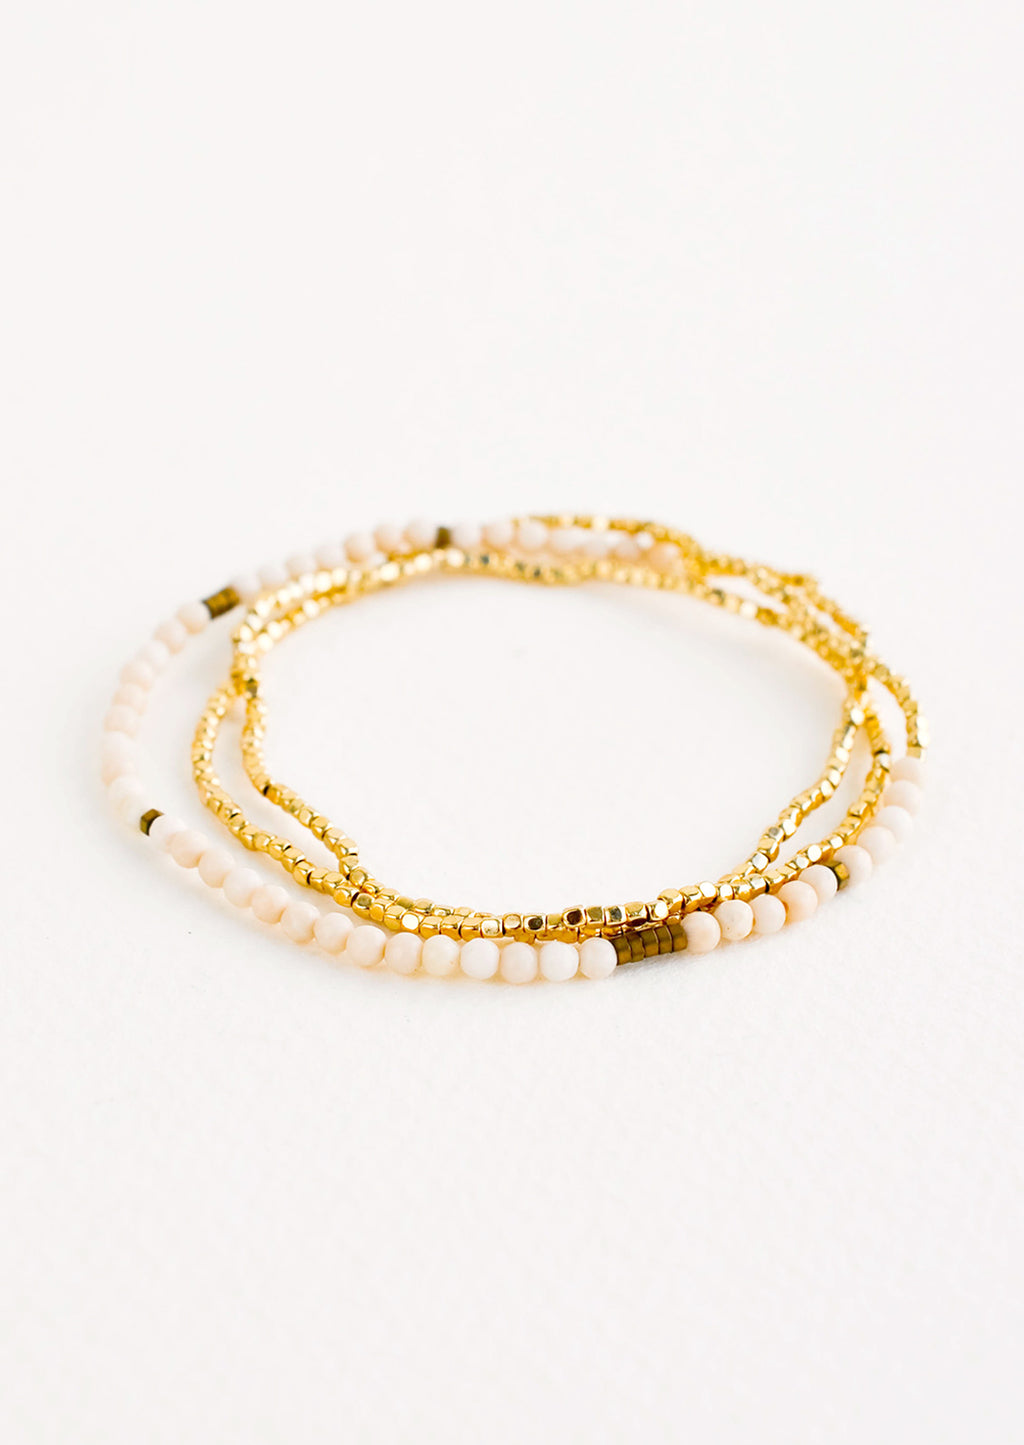 White Fossil: A single strand bracelet of gold and ivory beads wrapped upon itself in three layers. 